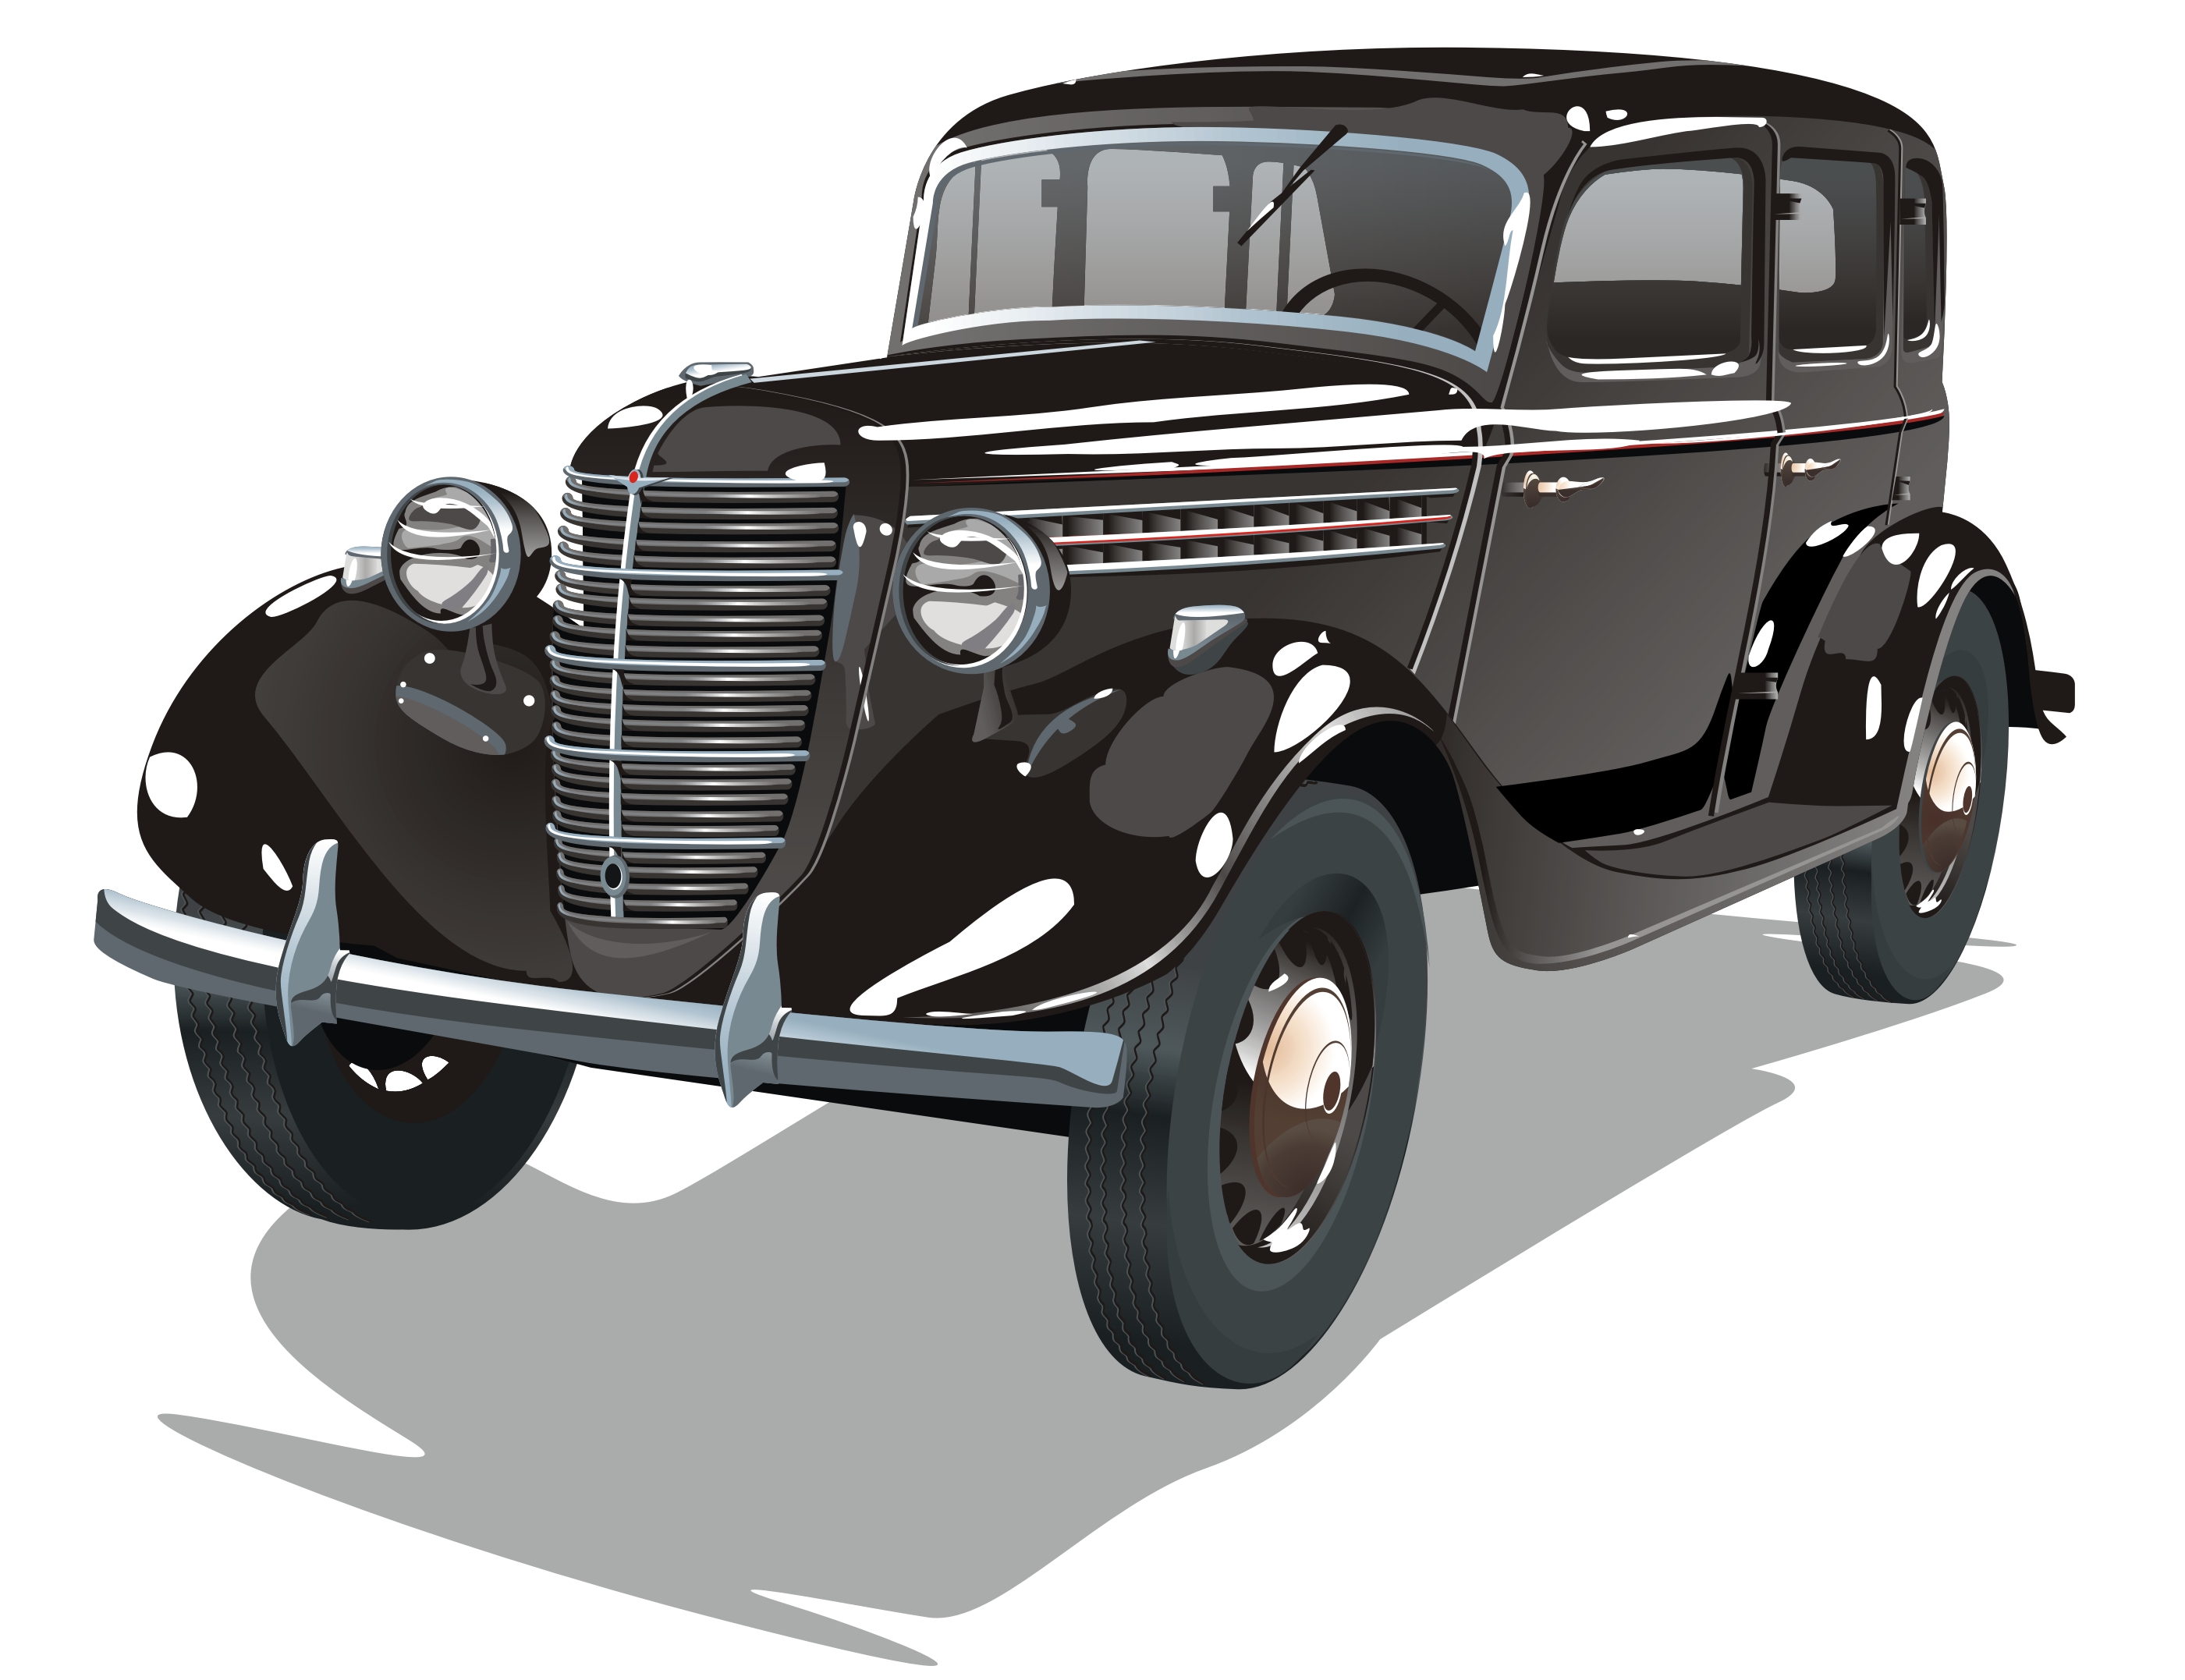 About Vintage Cars 